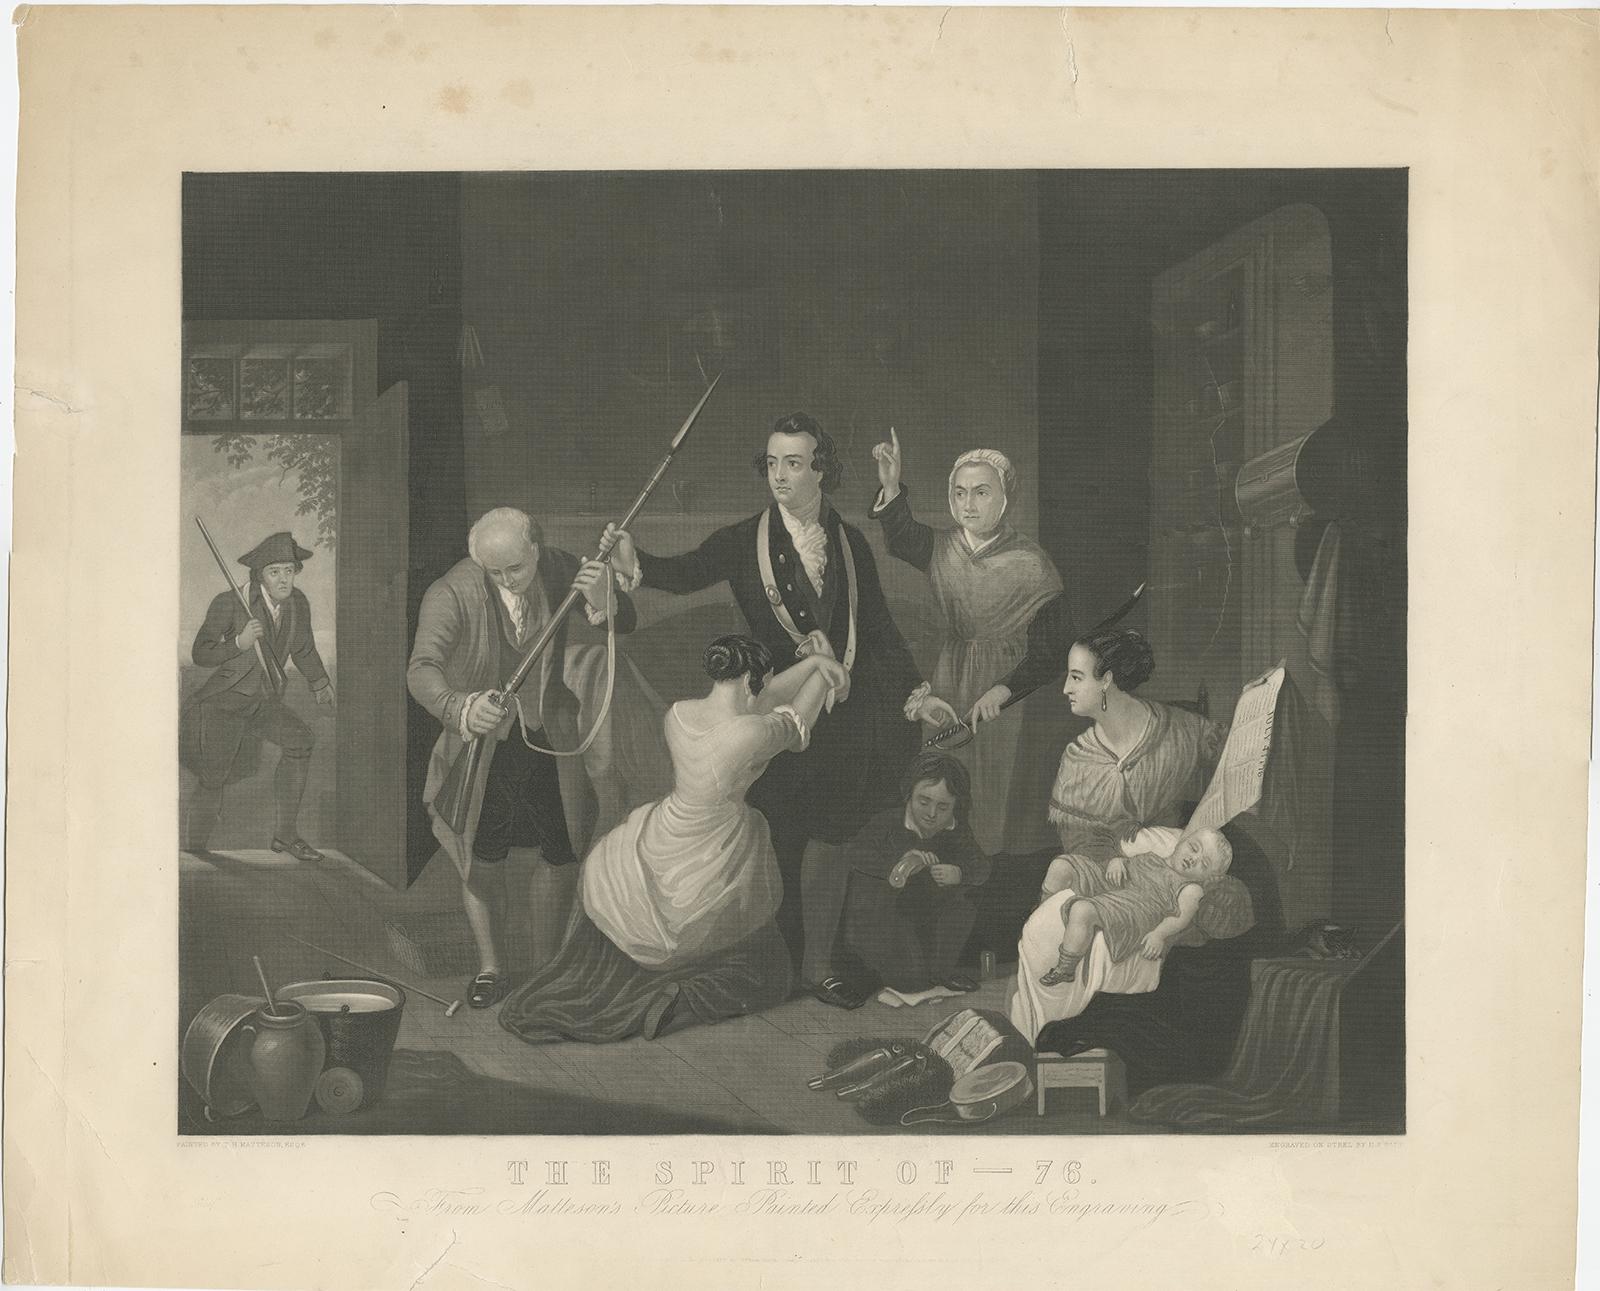 Description: Antique print titled 'The Spirit of - 76'. 

Original engraving showing a scene of the American Revolution. Made after a painting by Tompkins Harrison Matteson. 

Artists and Engravers: Published by William Smith. 

Condition: